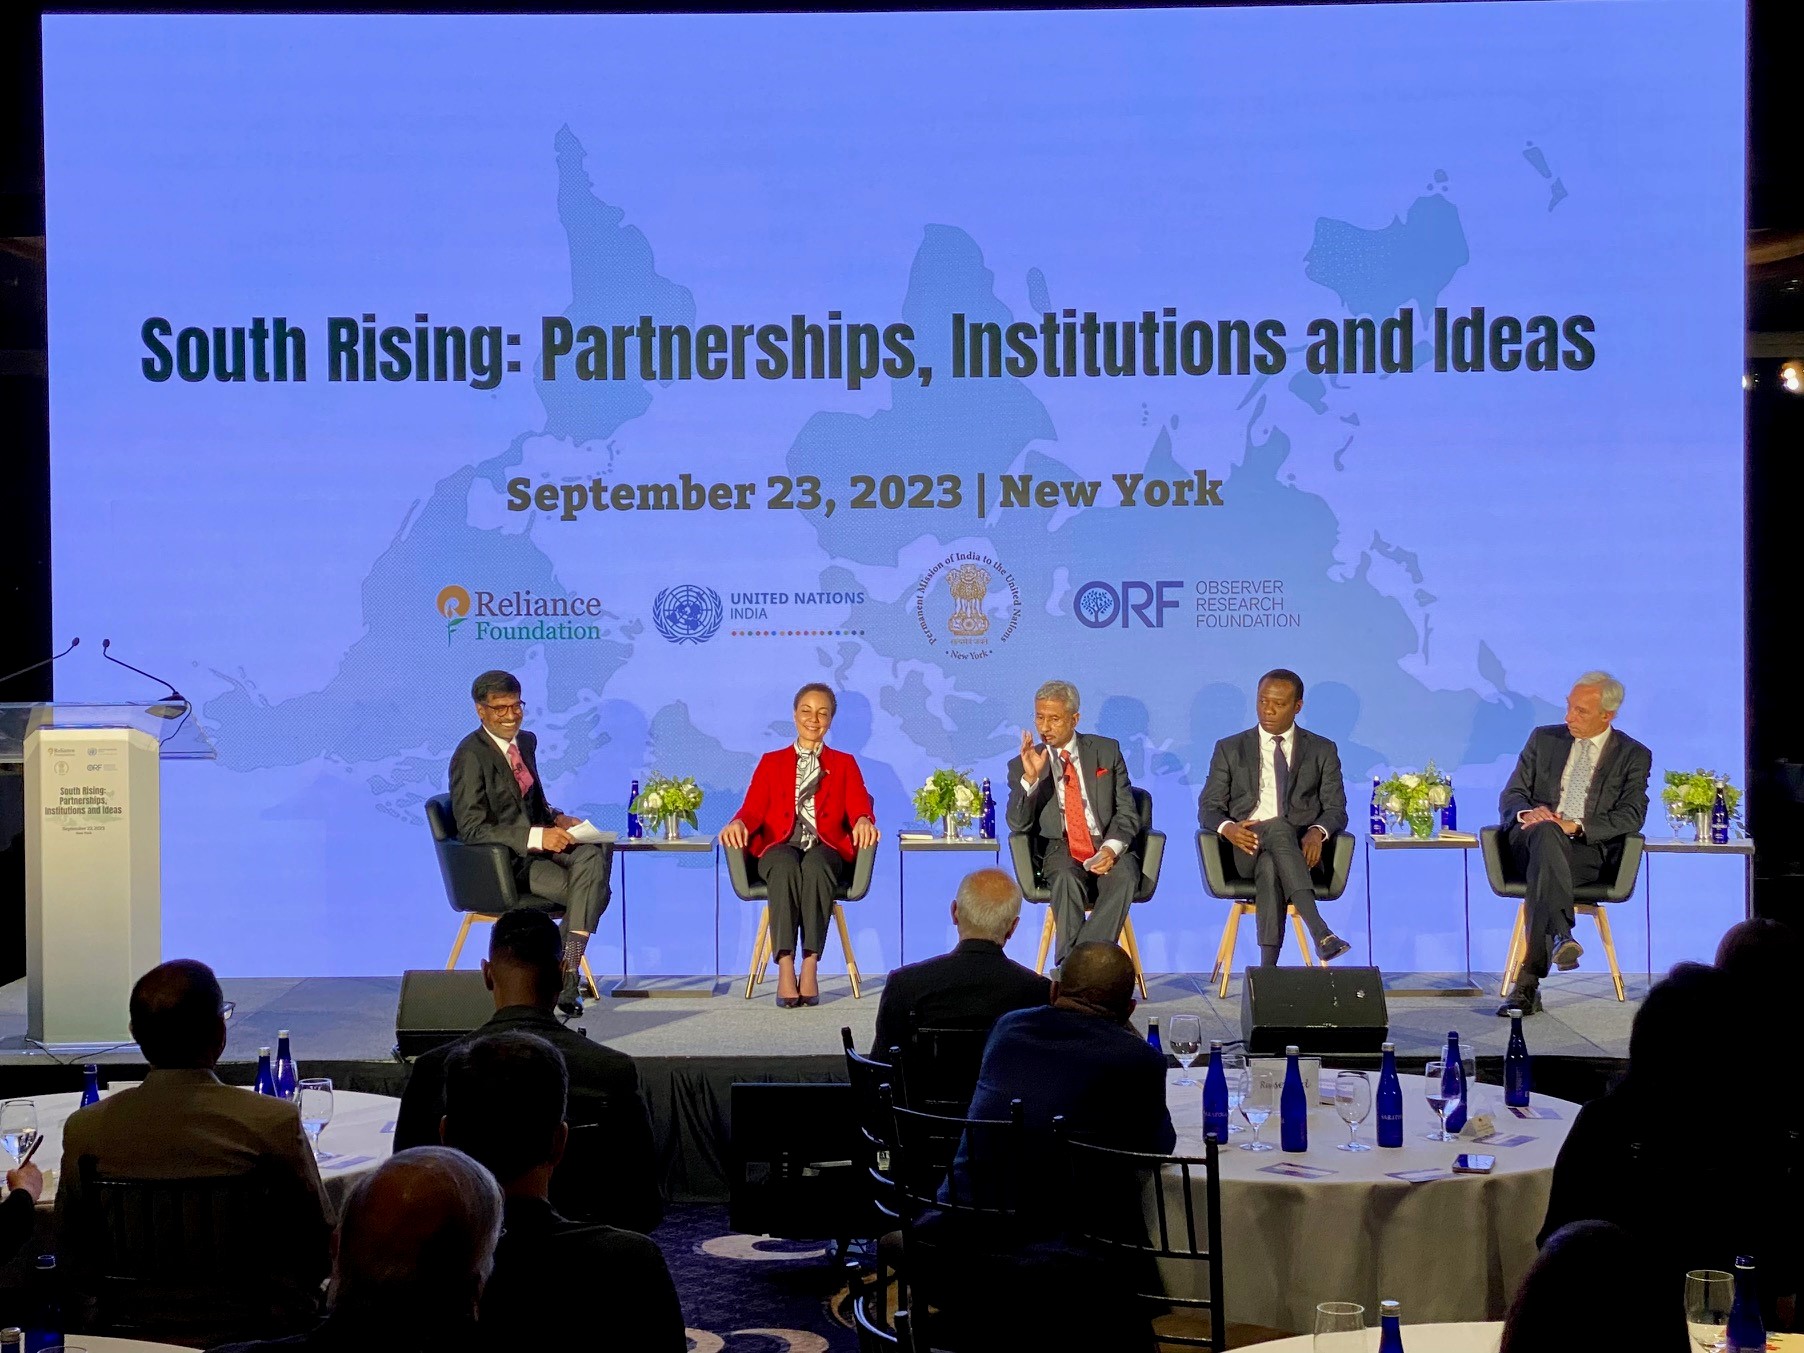 High-Profile Event in New York Highlights India’s SDG Leadership